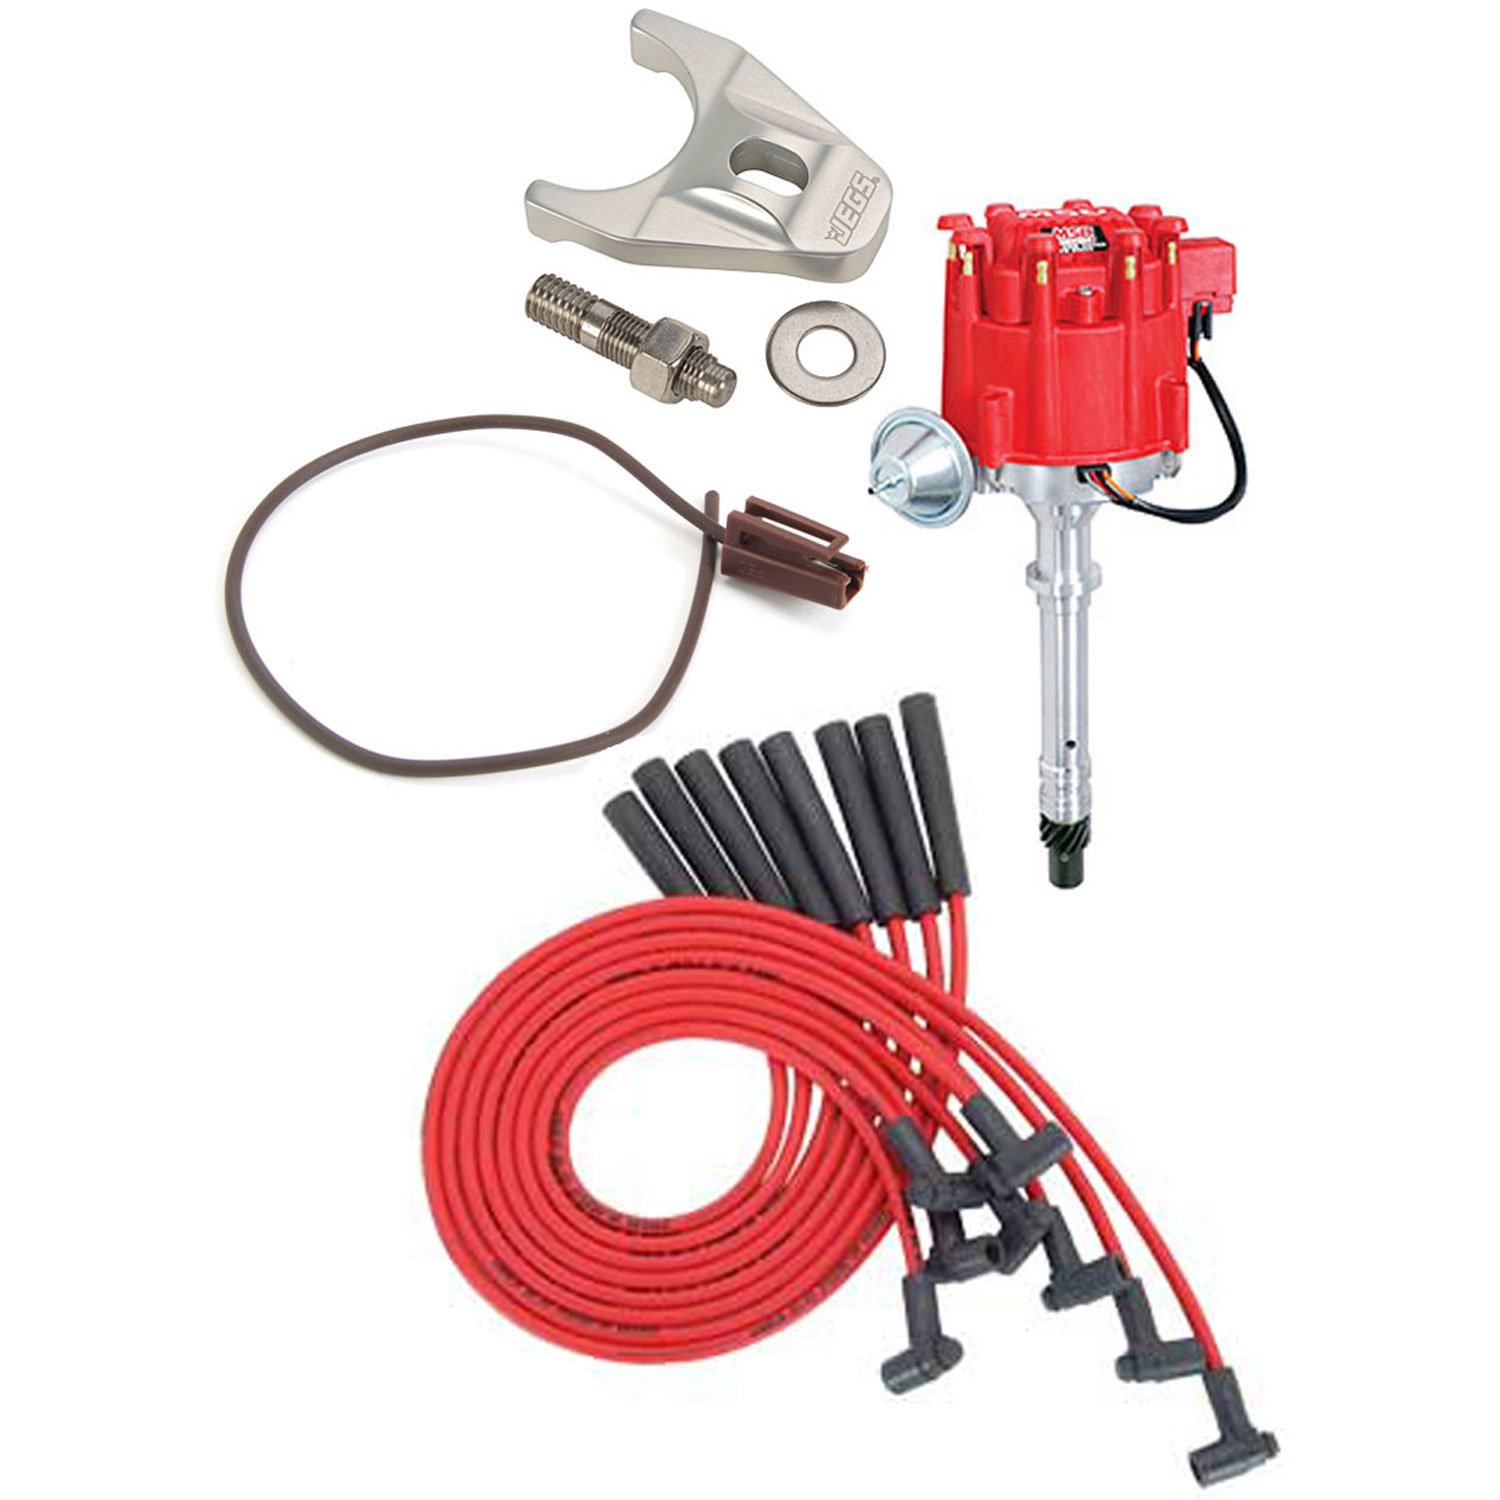 Chevy HEI Ignition System Kit Big Block Chevy